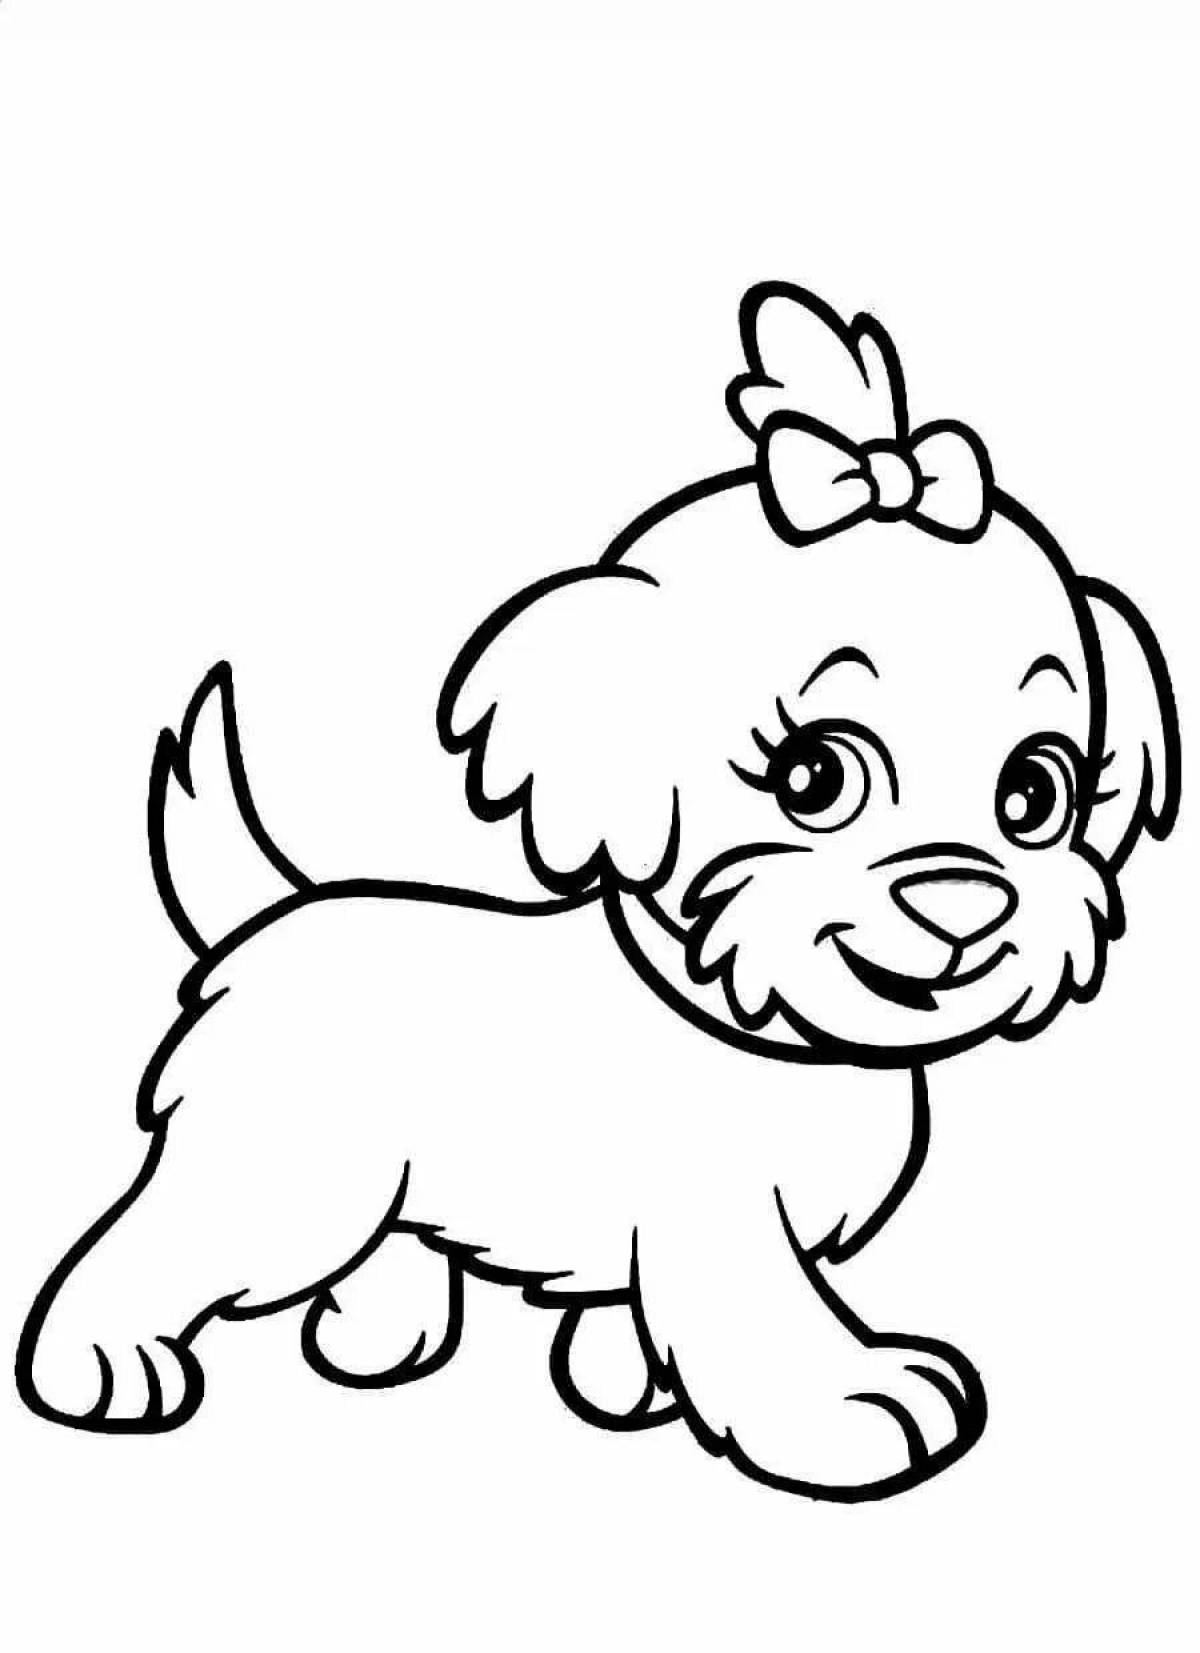 Joyful dog coloring book for children 5-6 years old